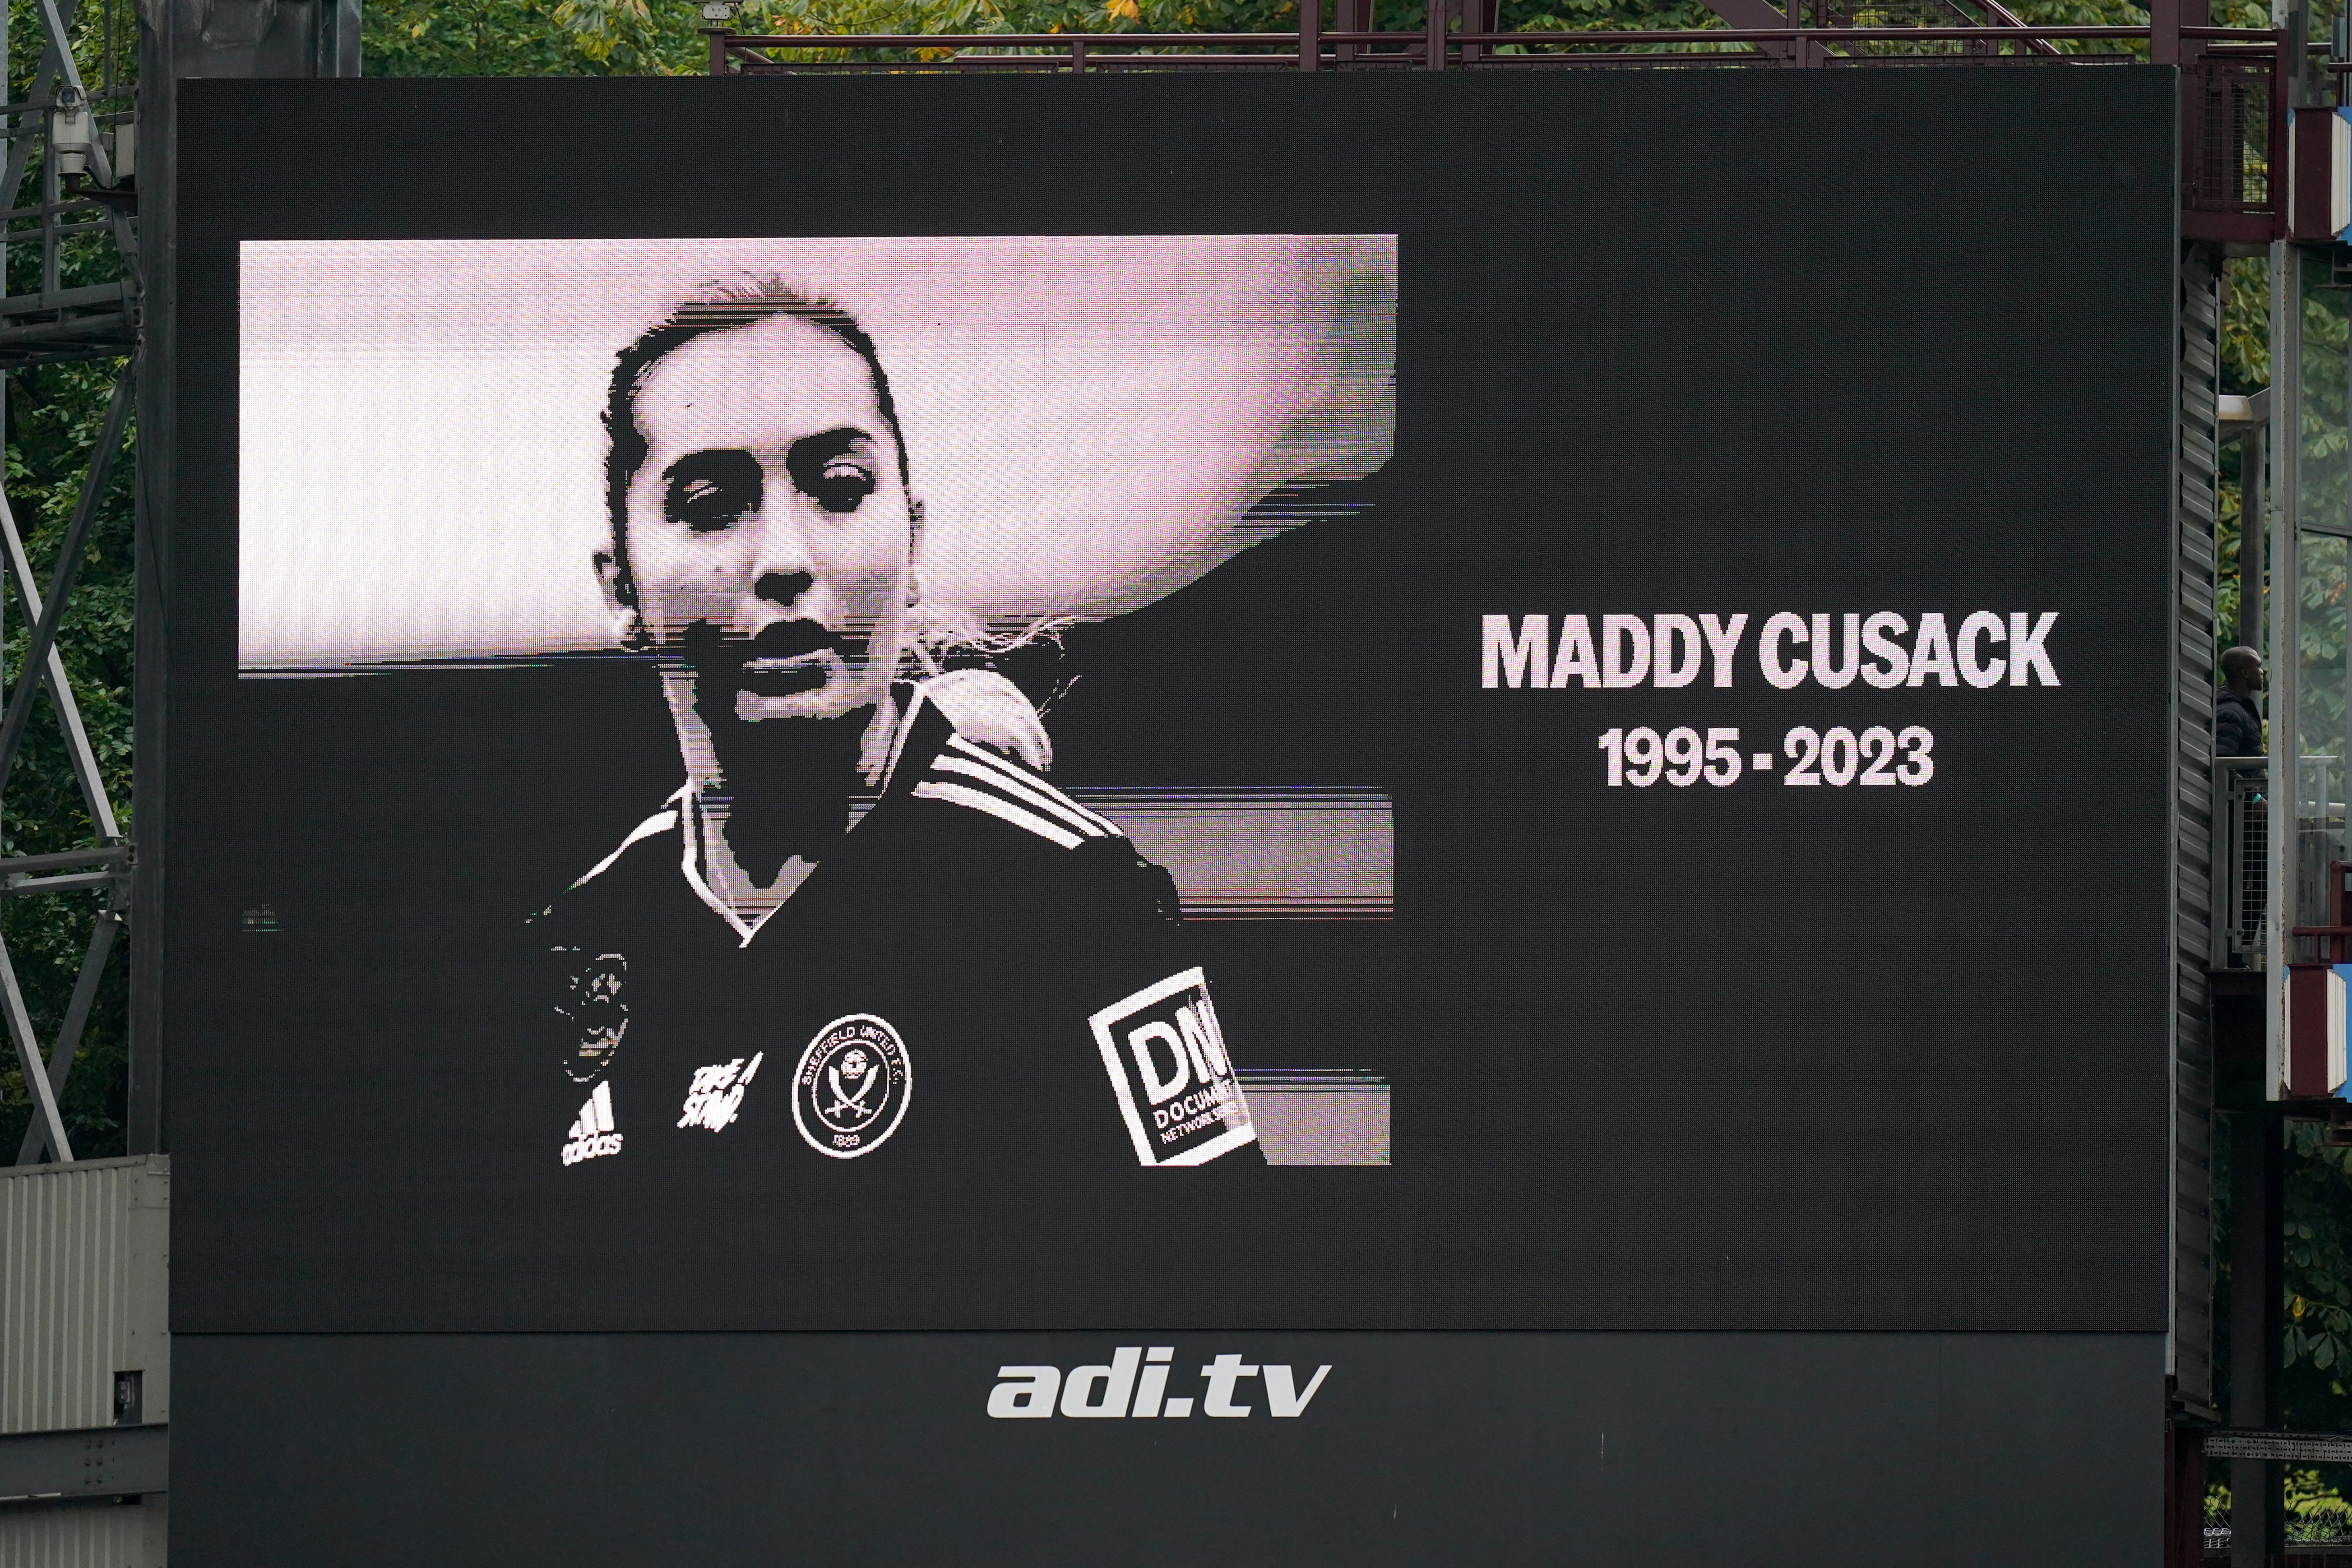 Maddy Cusack died aged 27 in September